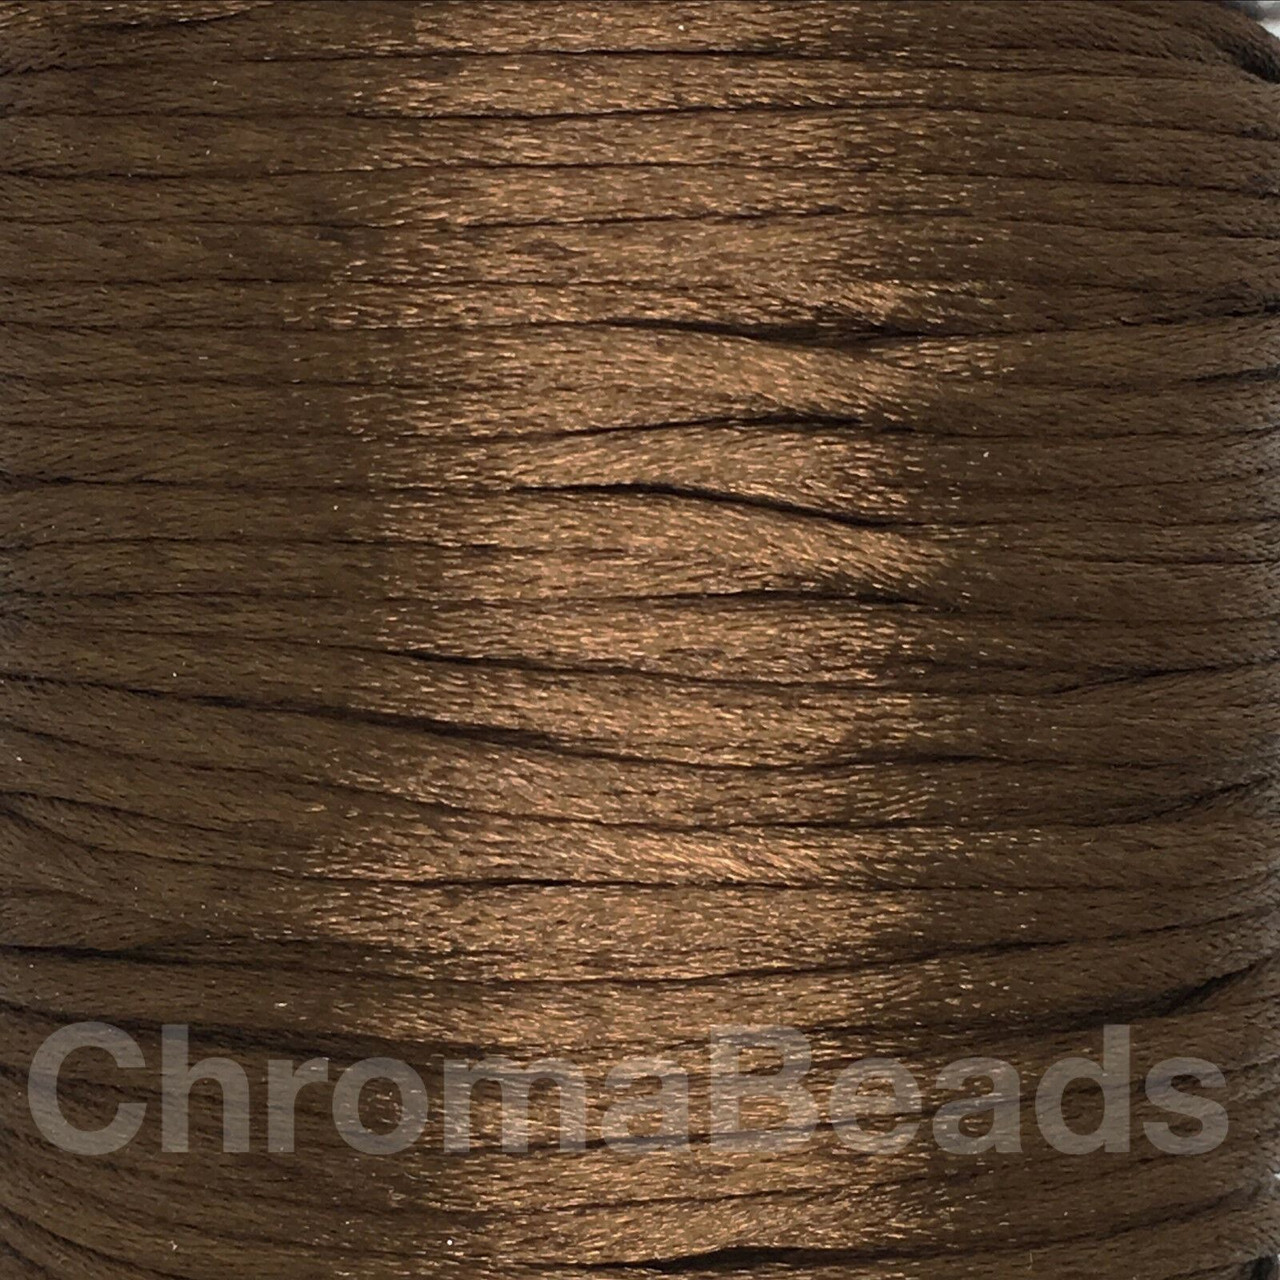 2x Reels of Nylon Cord (Rattail) - Chocolate Brown, approx 45m each